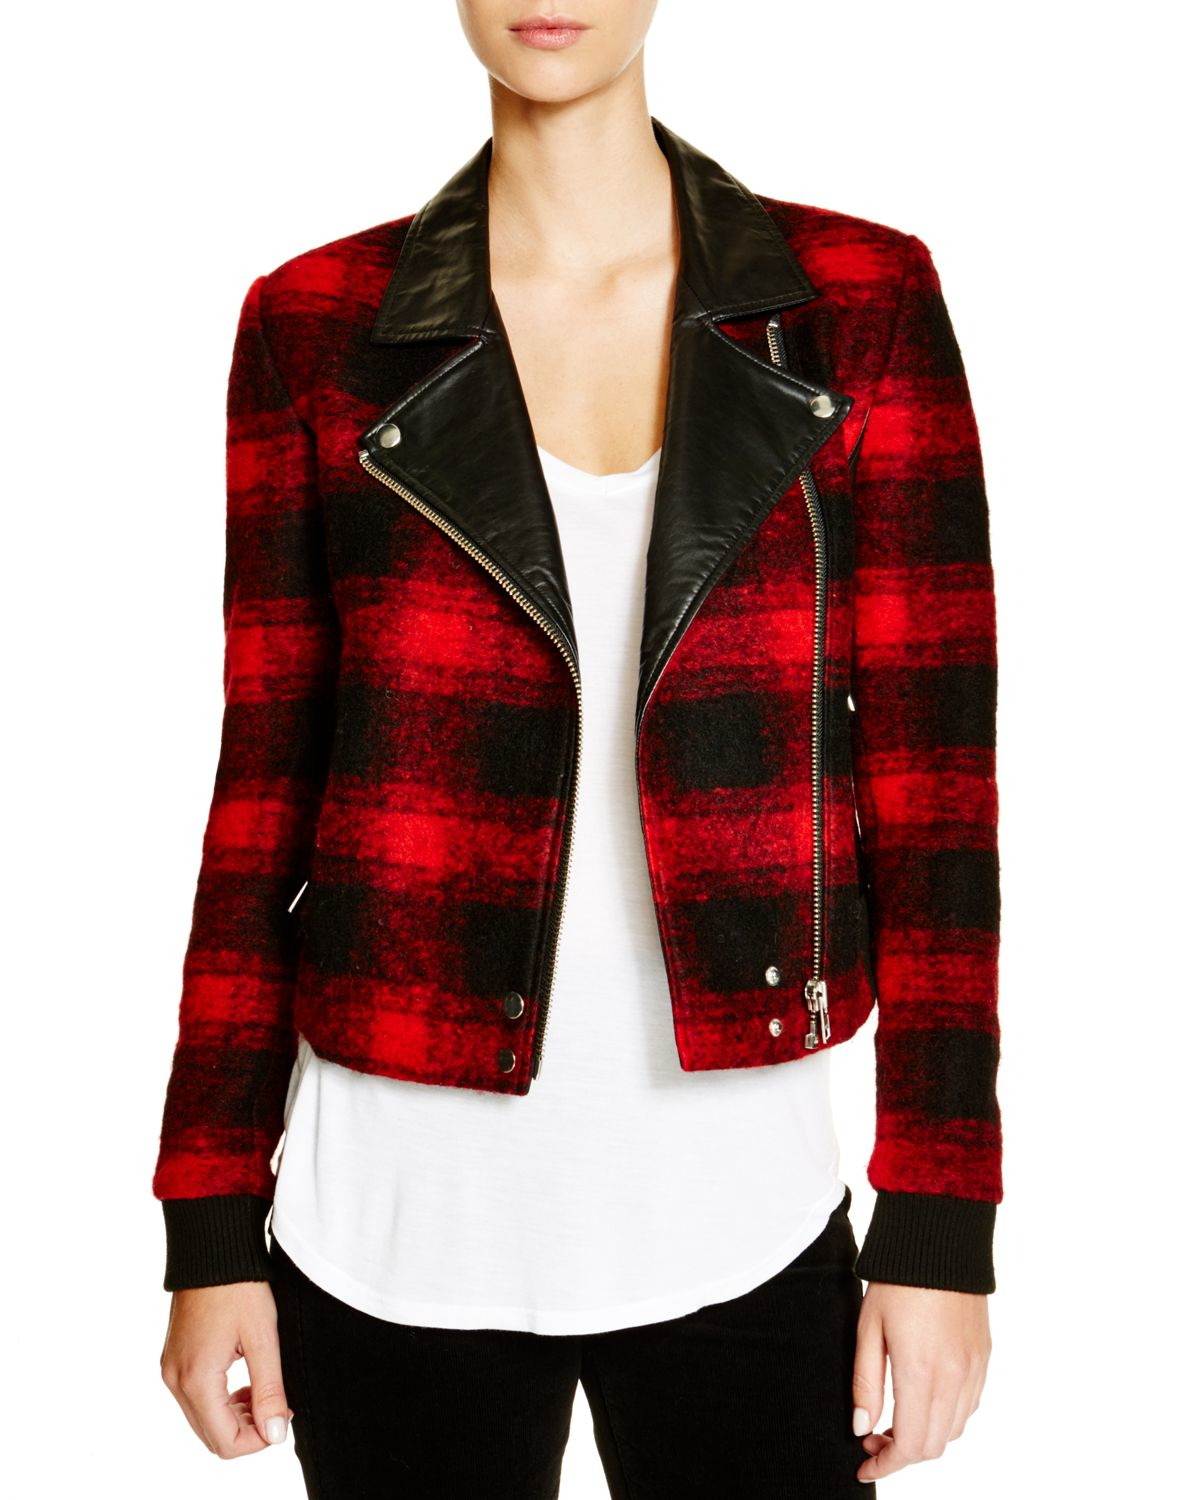 Paige Plaid Moto Jacket in Red (Red/Black) Lyst